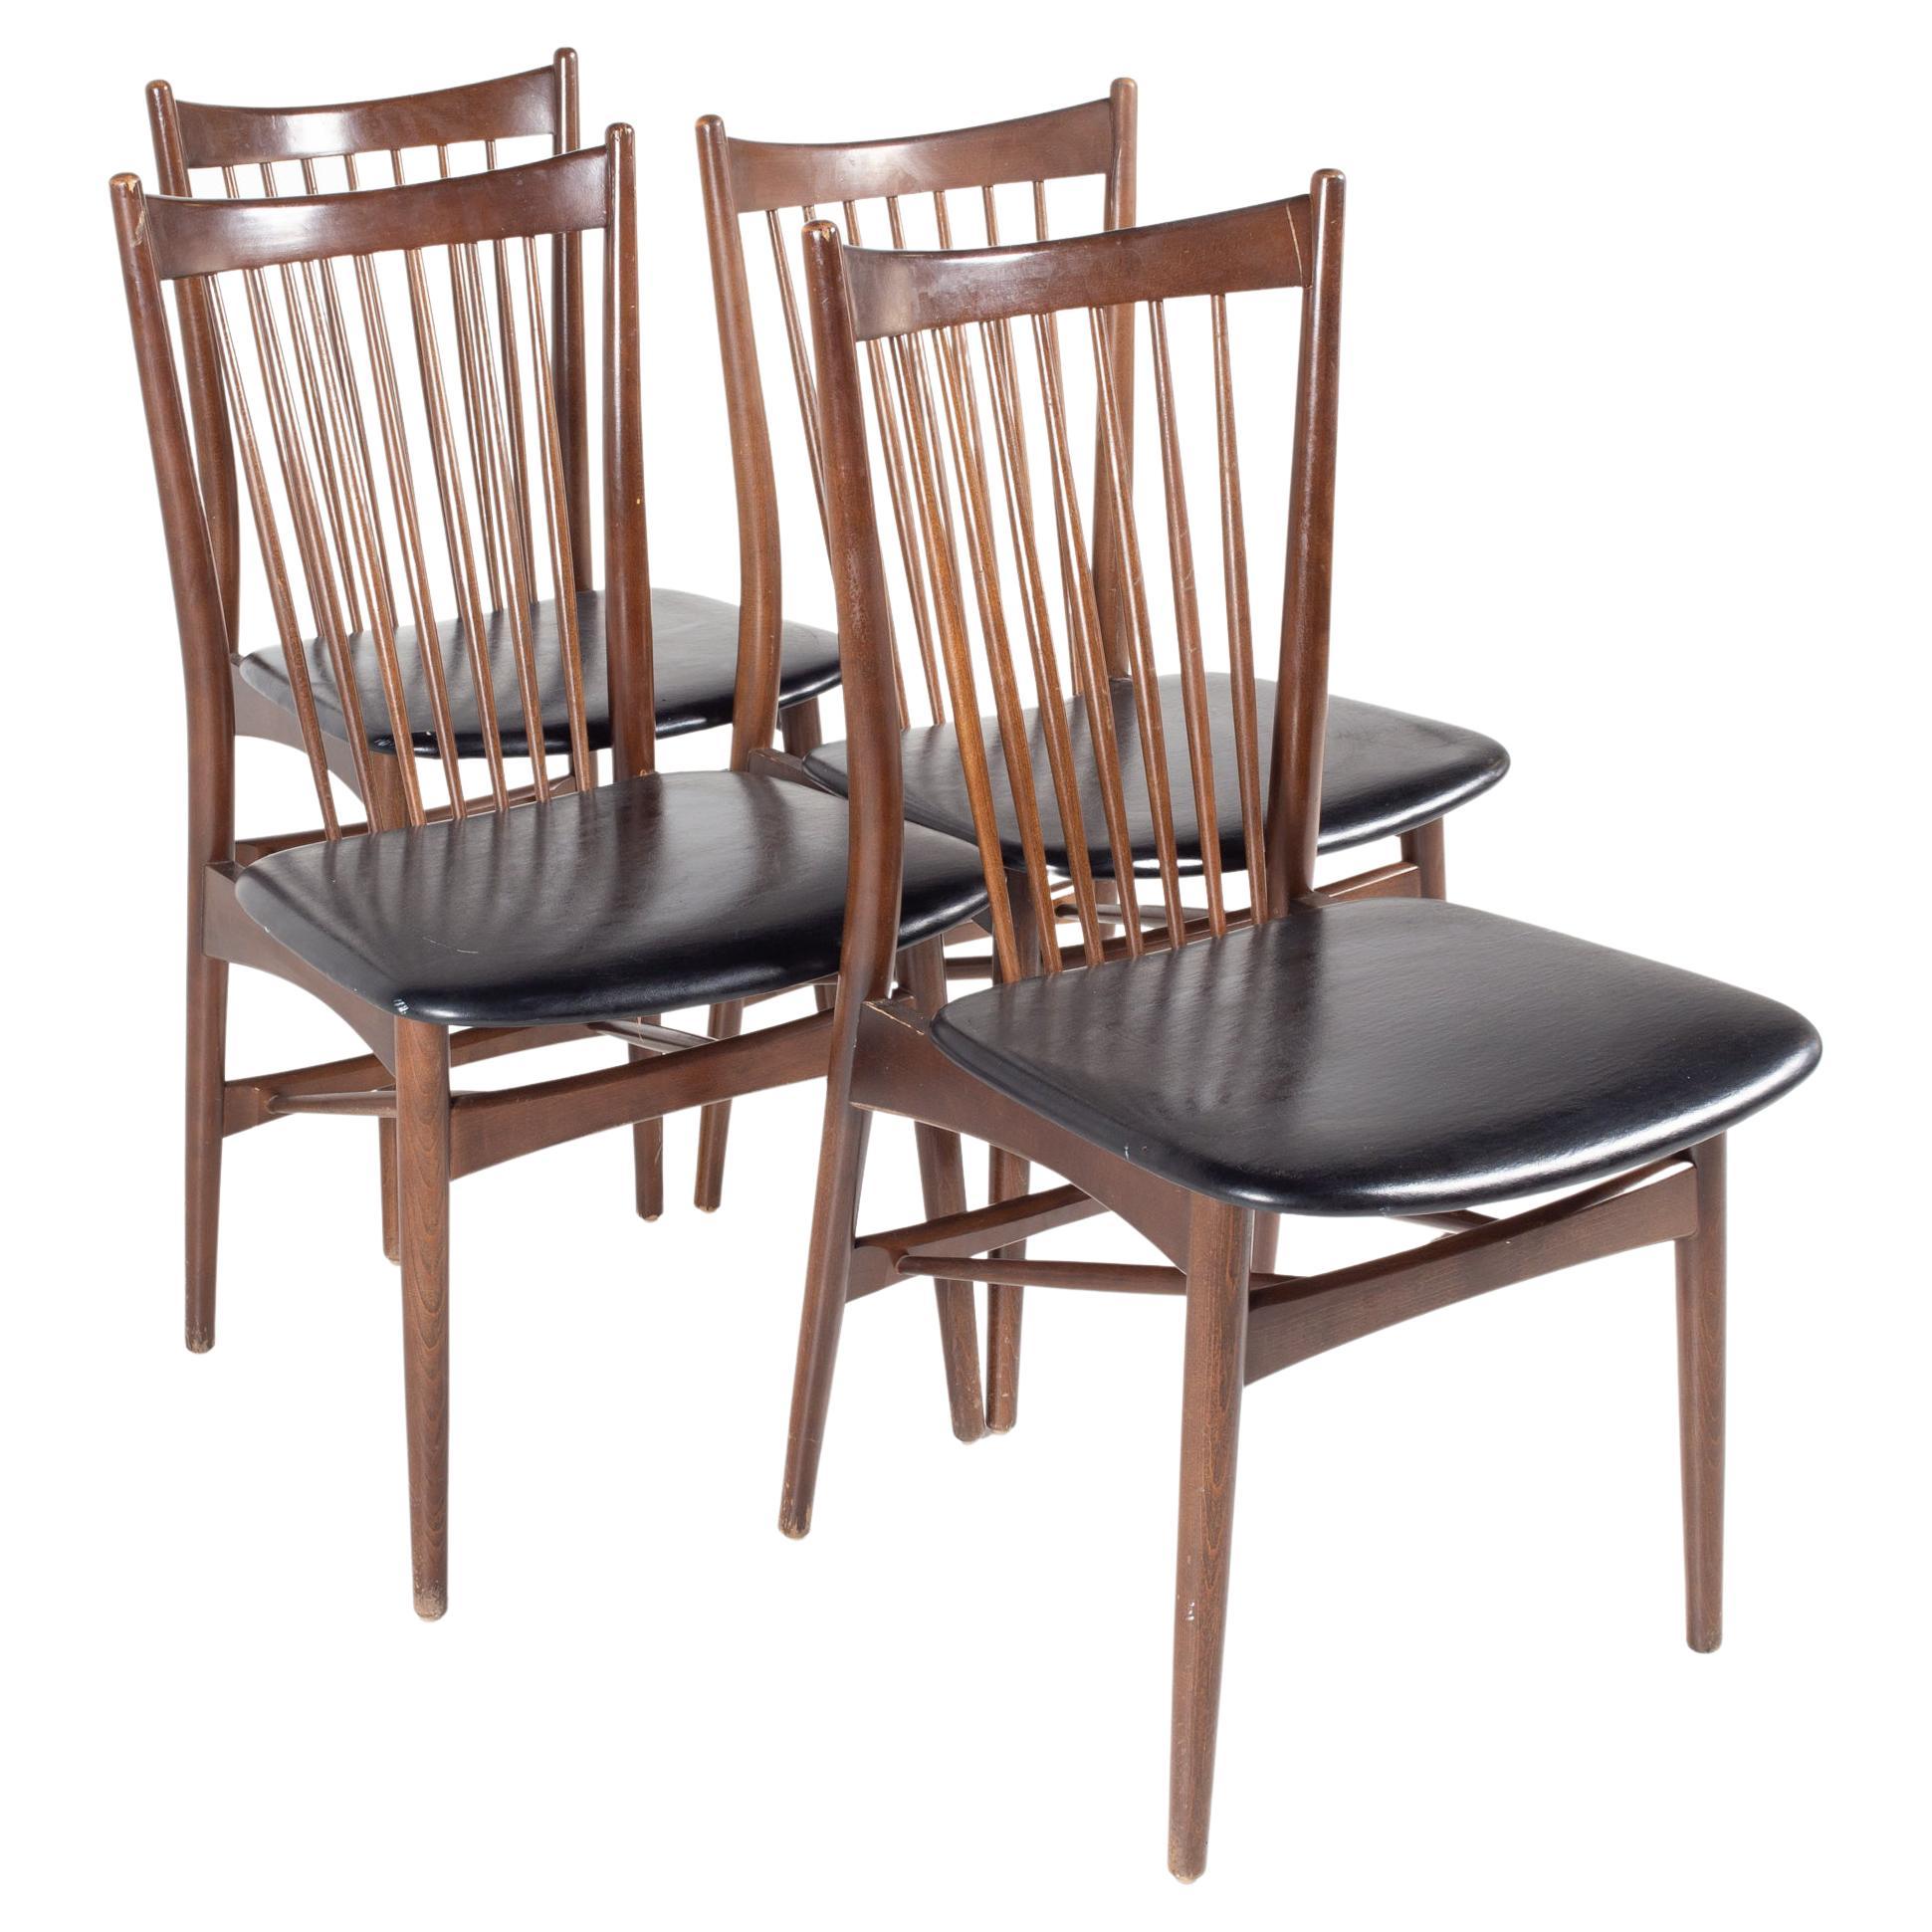 Viko Baumritter Style Mid Century Walnut Dining Chairs, Set of 4 For Sale